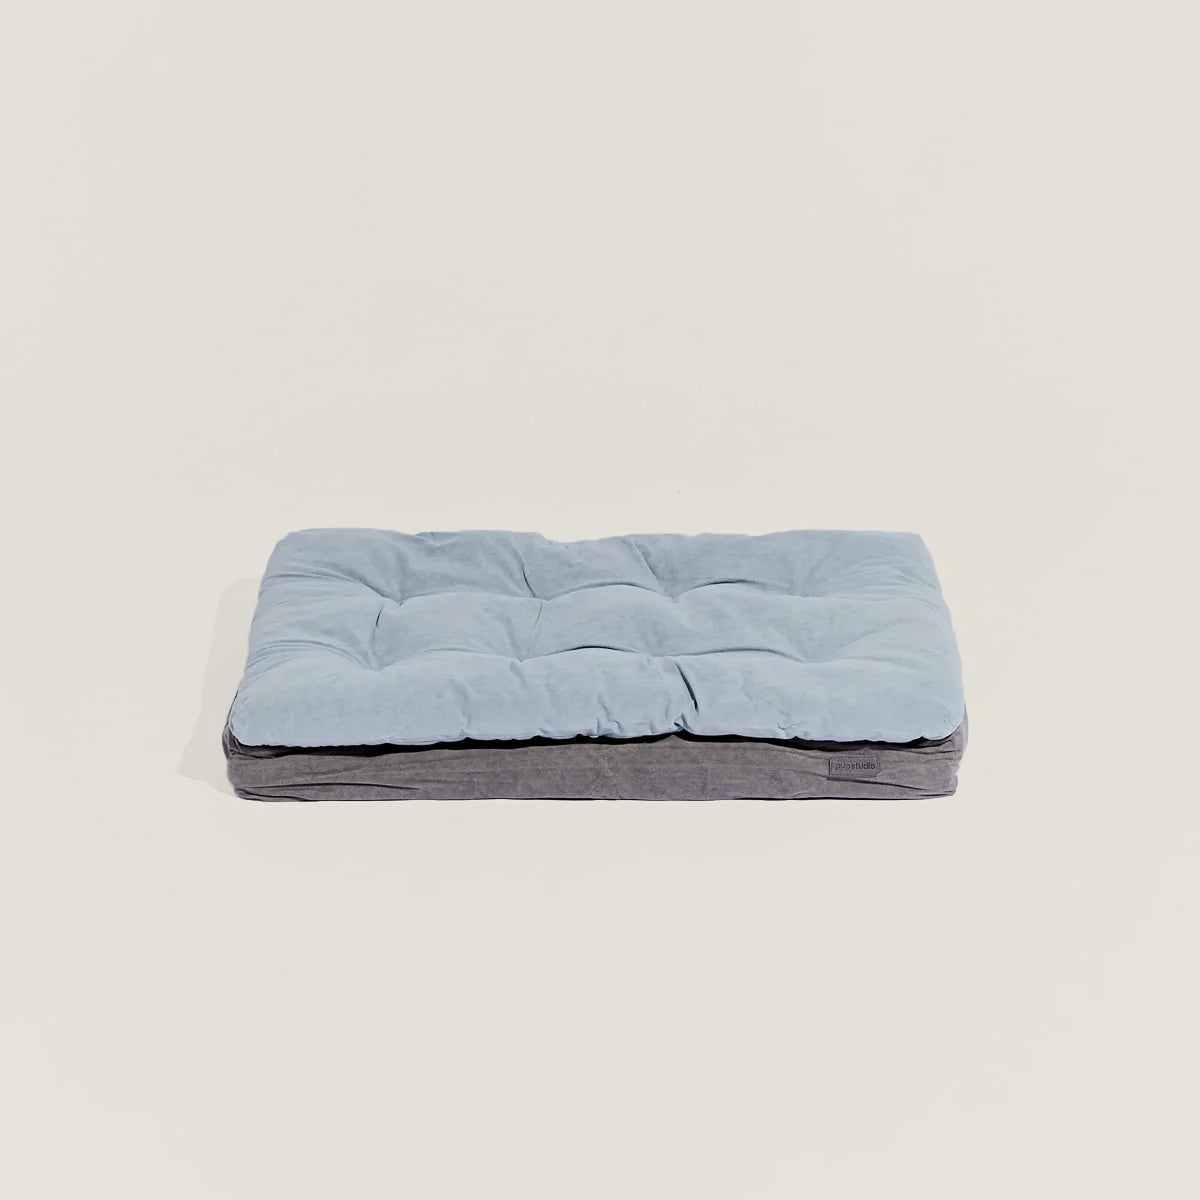 The Soft-Square Bed (Blue)